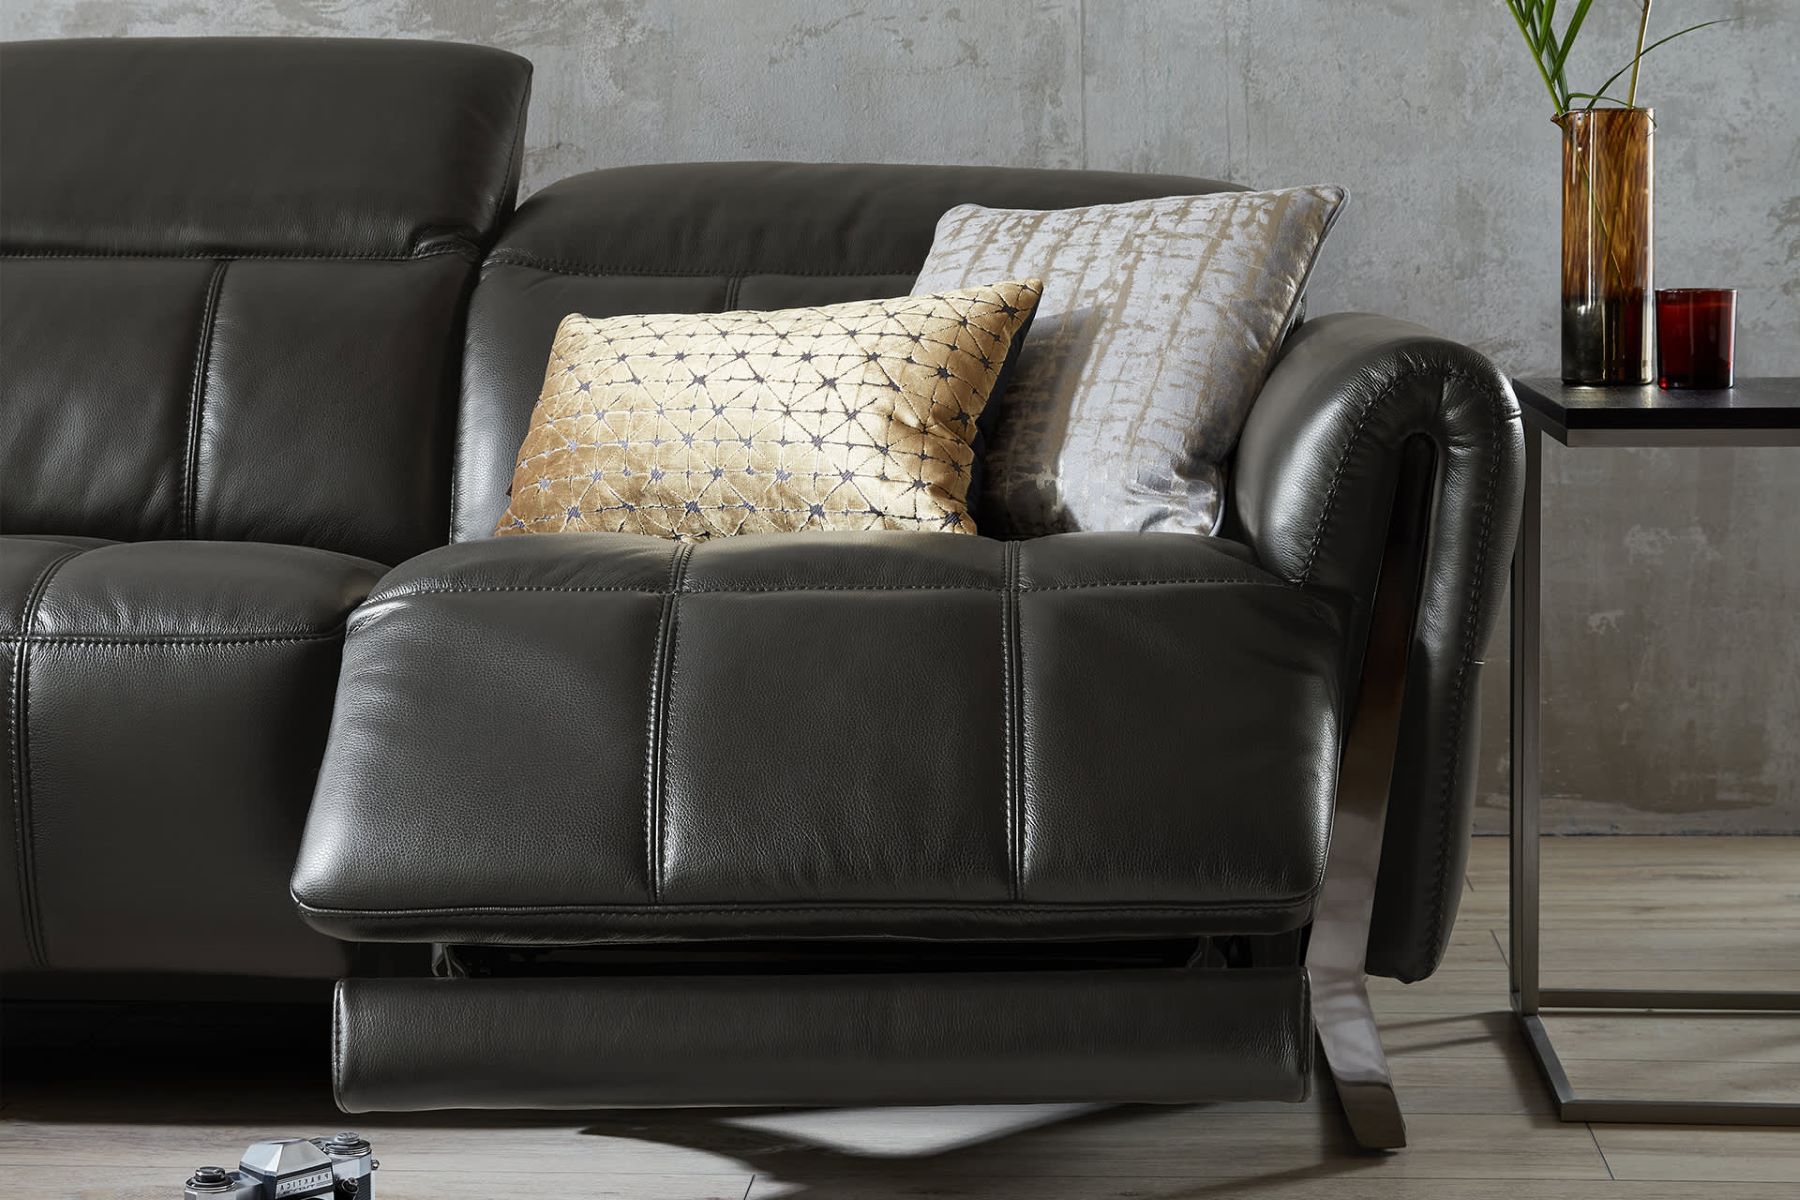 How To Dismantle A Sofa Recliner